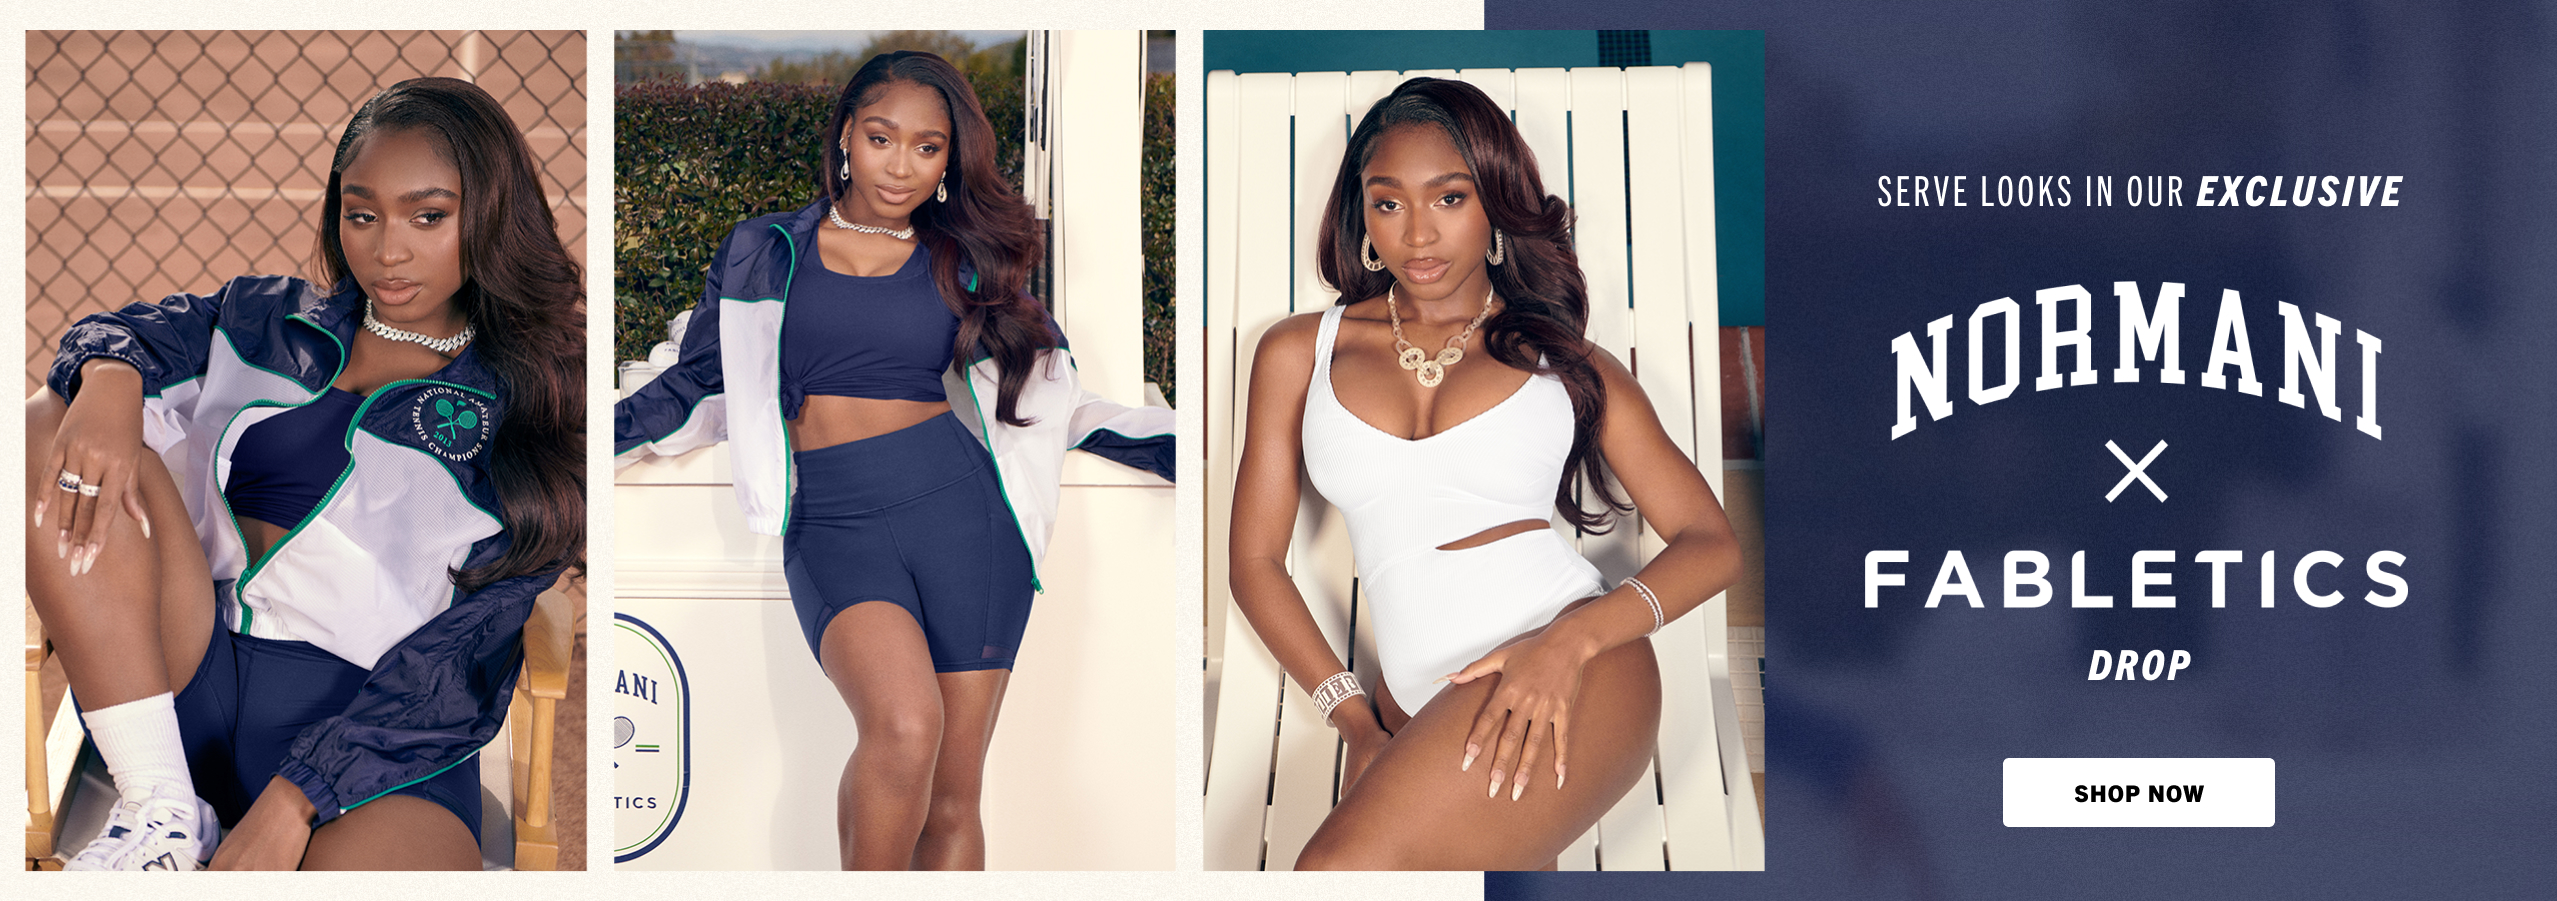 Take the quiz to shop the Norman x Fabletics drop